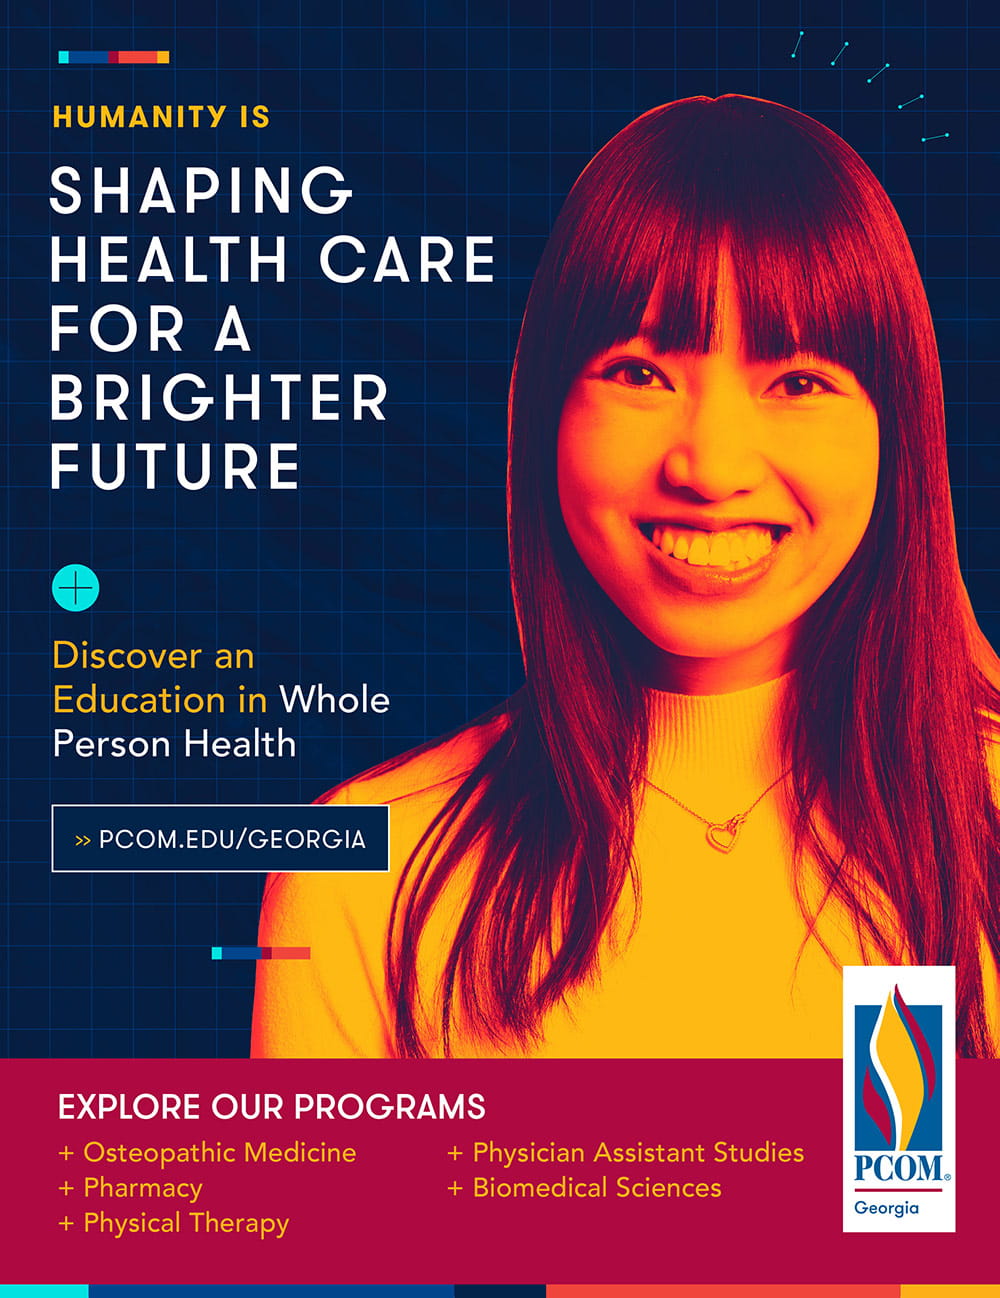 PCOM Georgia print ad featuring a female grad student smiling and the text: "Humanity is Shaping Health Care for a Brighter Future. Discover an Educatio in Whole Person Health"